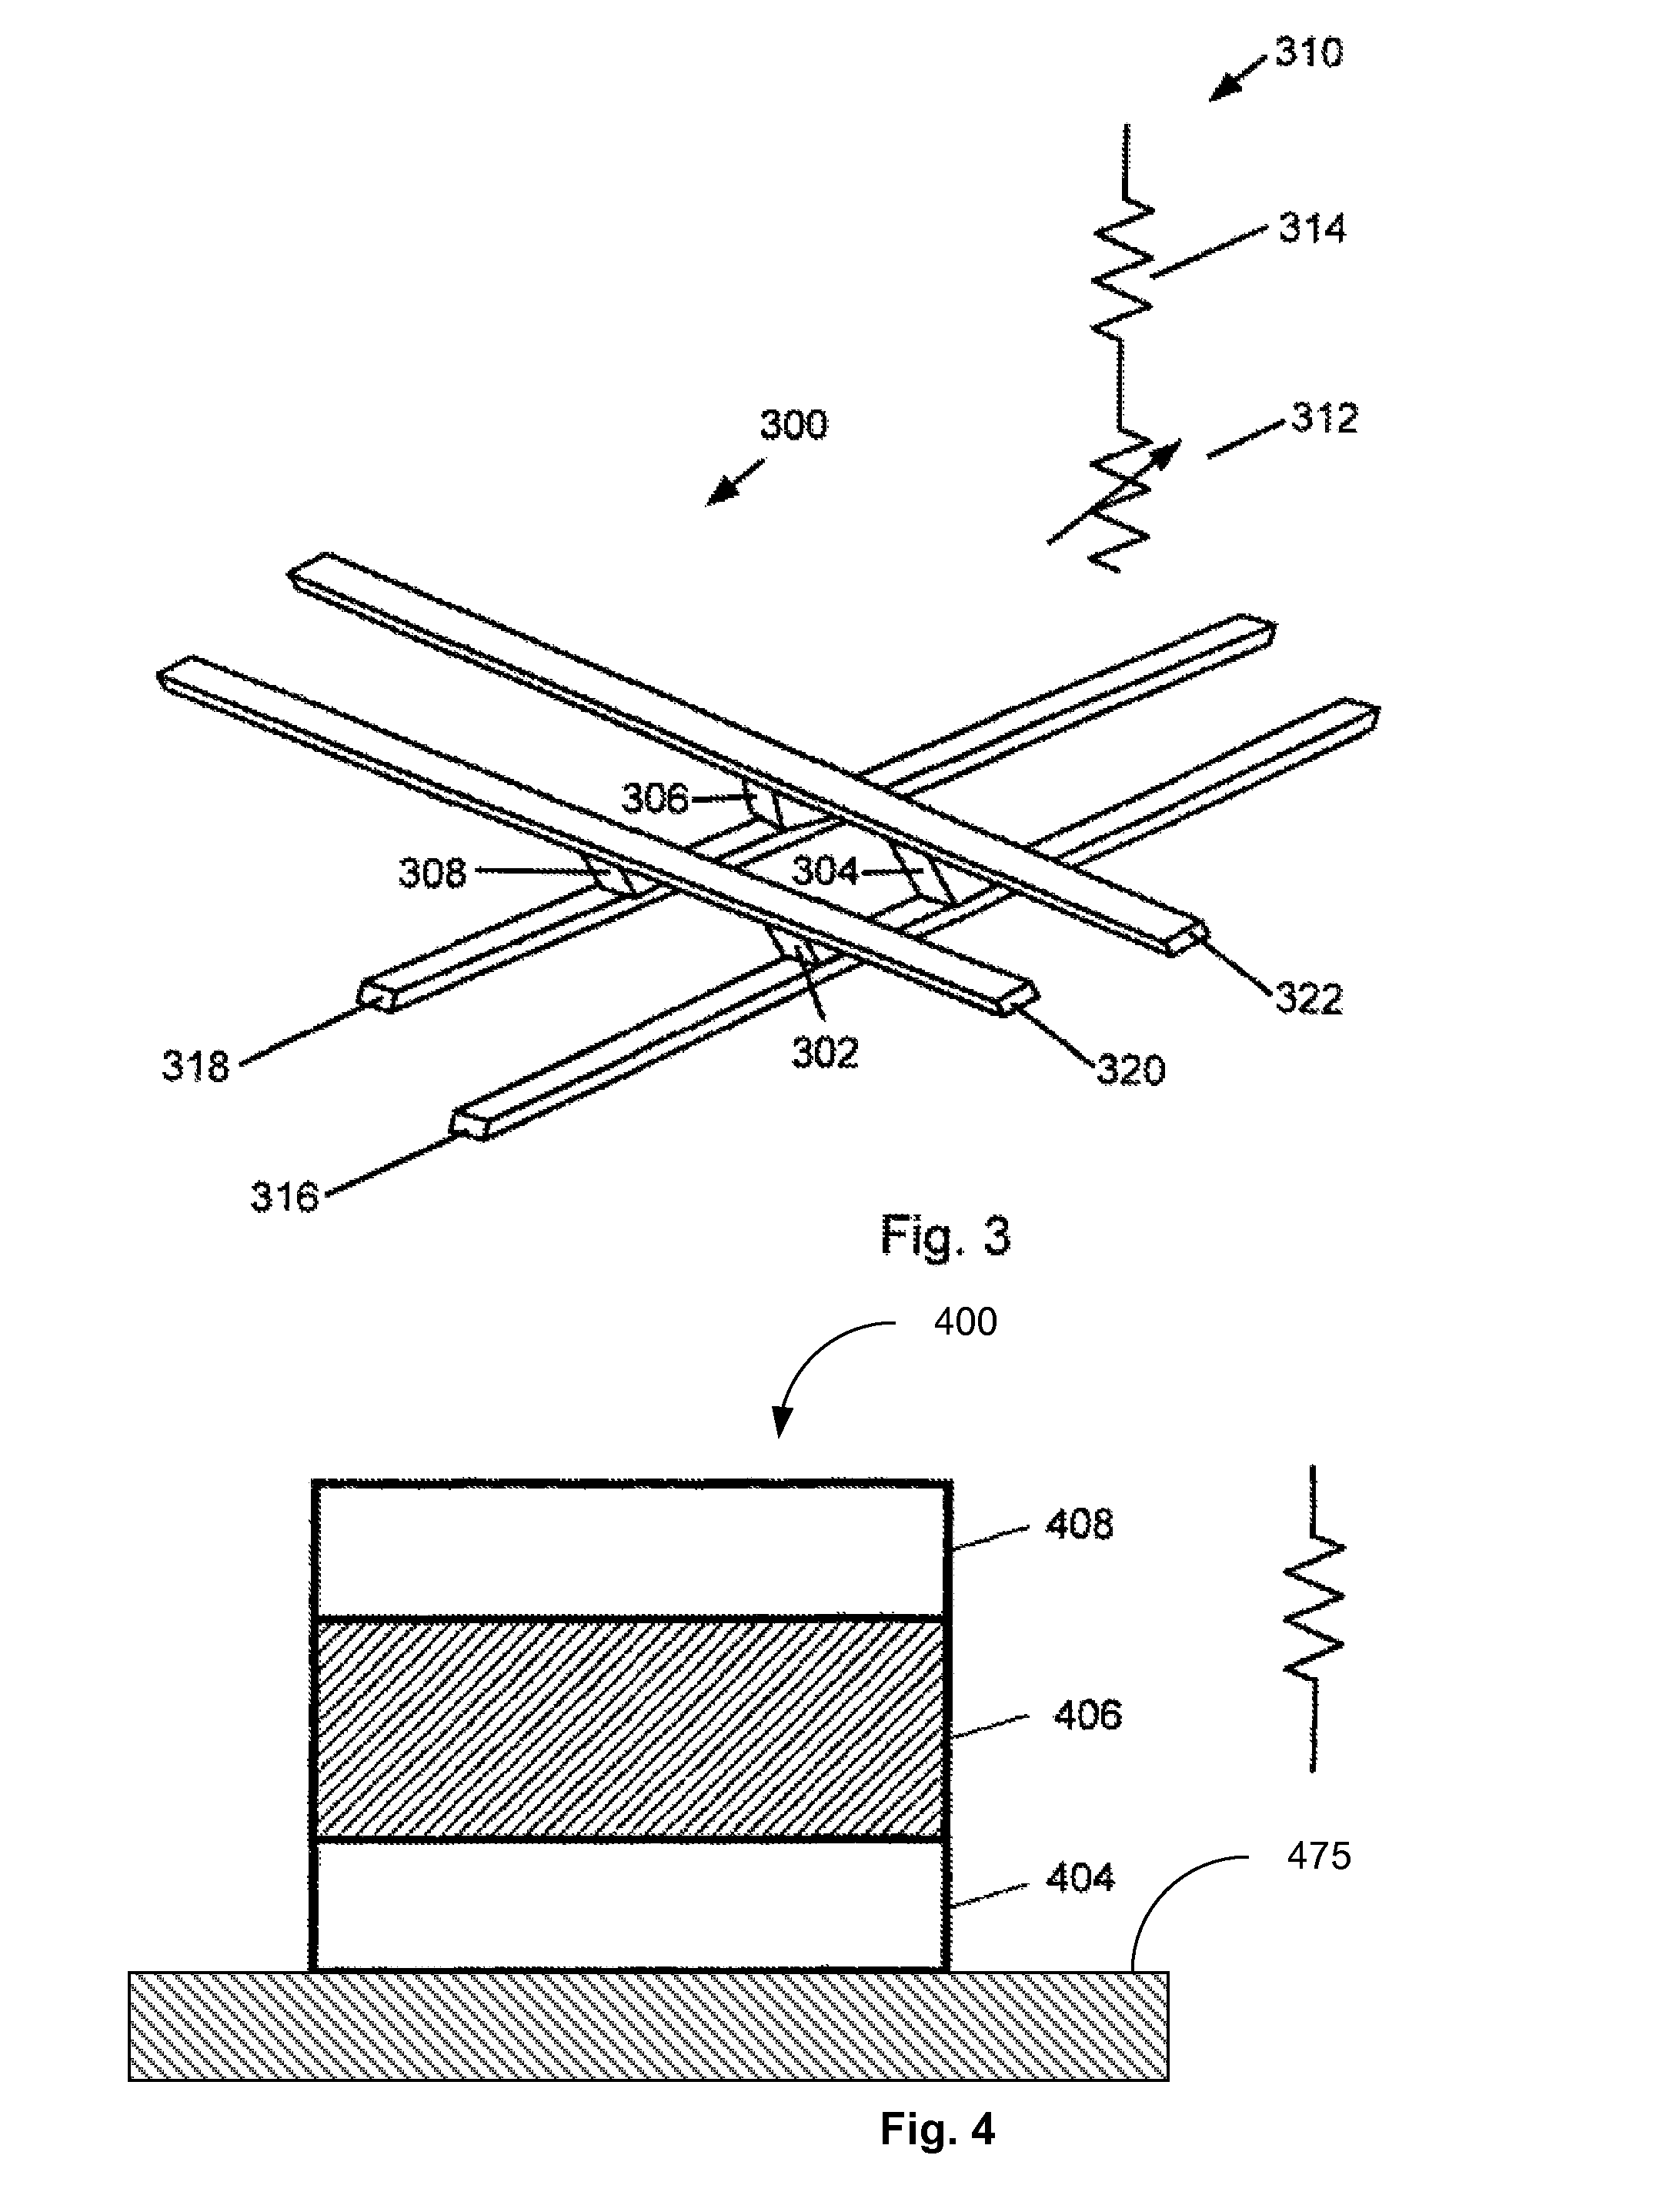 Rectification element and method for resistive switching for non volatile memory device